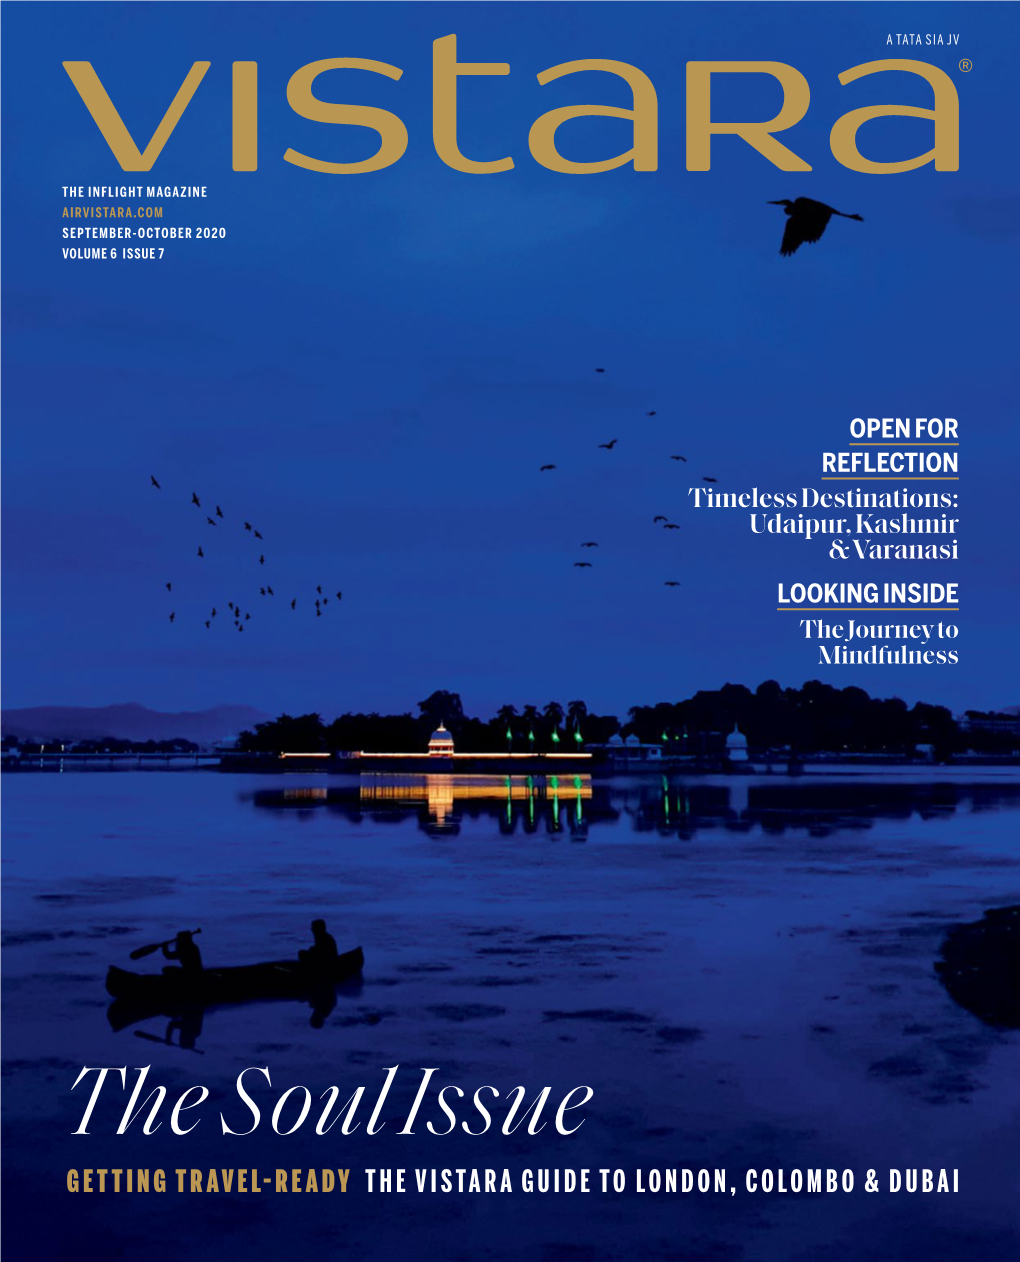 The Soul Issue GETTING TRAVEL-READY the VISTARA GUIDE to LONDON, COLOMBO & DUBAI